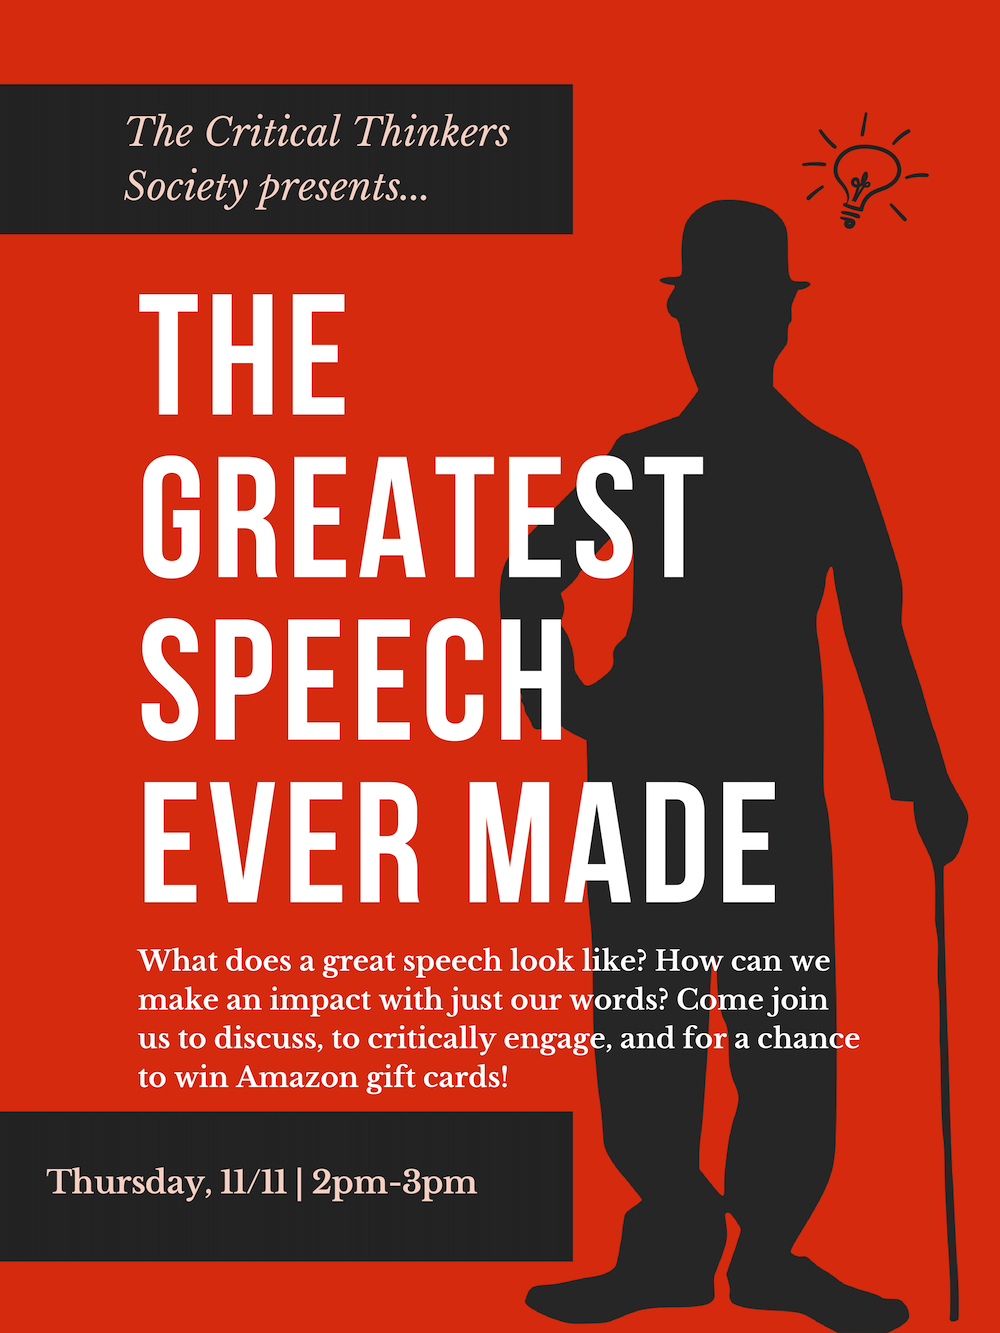 Critical Thinkers Society Presents: THE GREATEST SPEECH EVER MADE